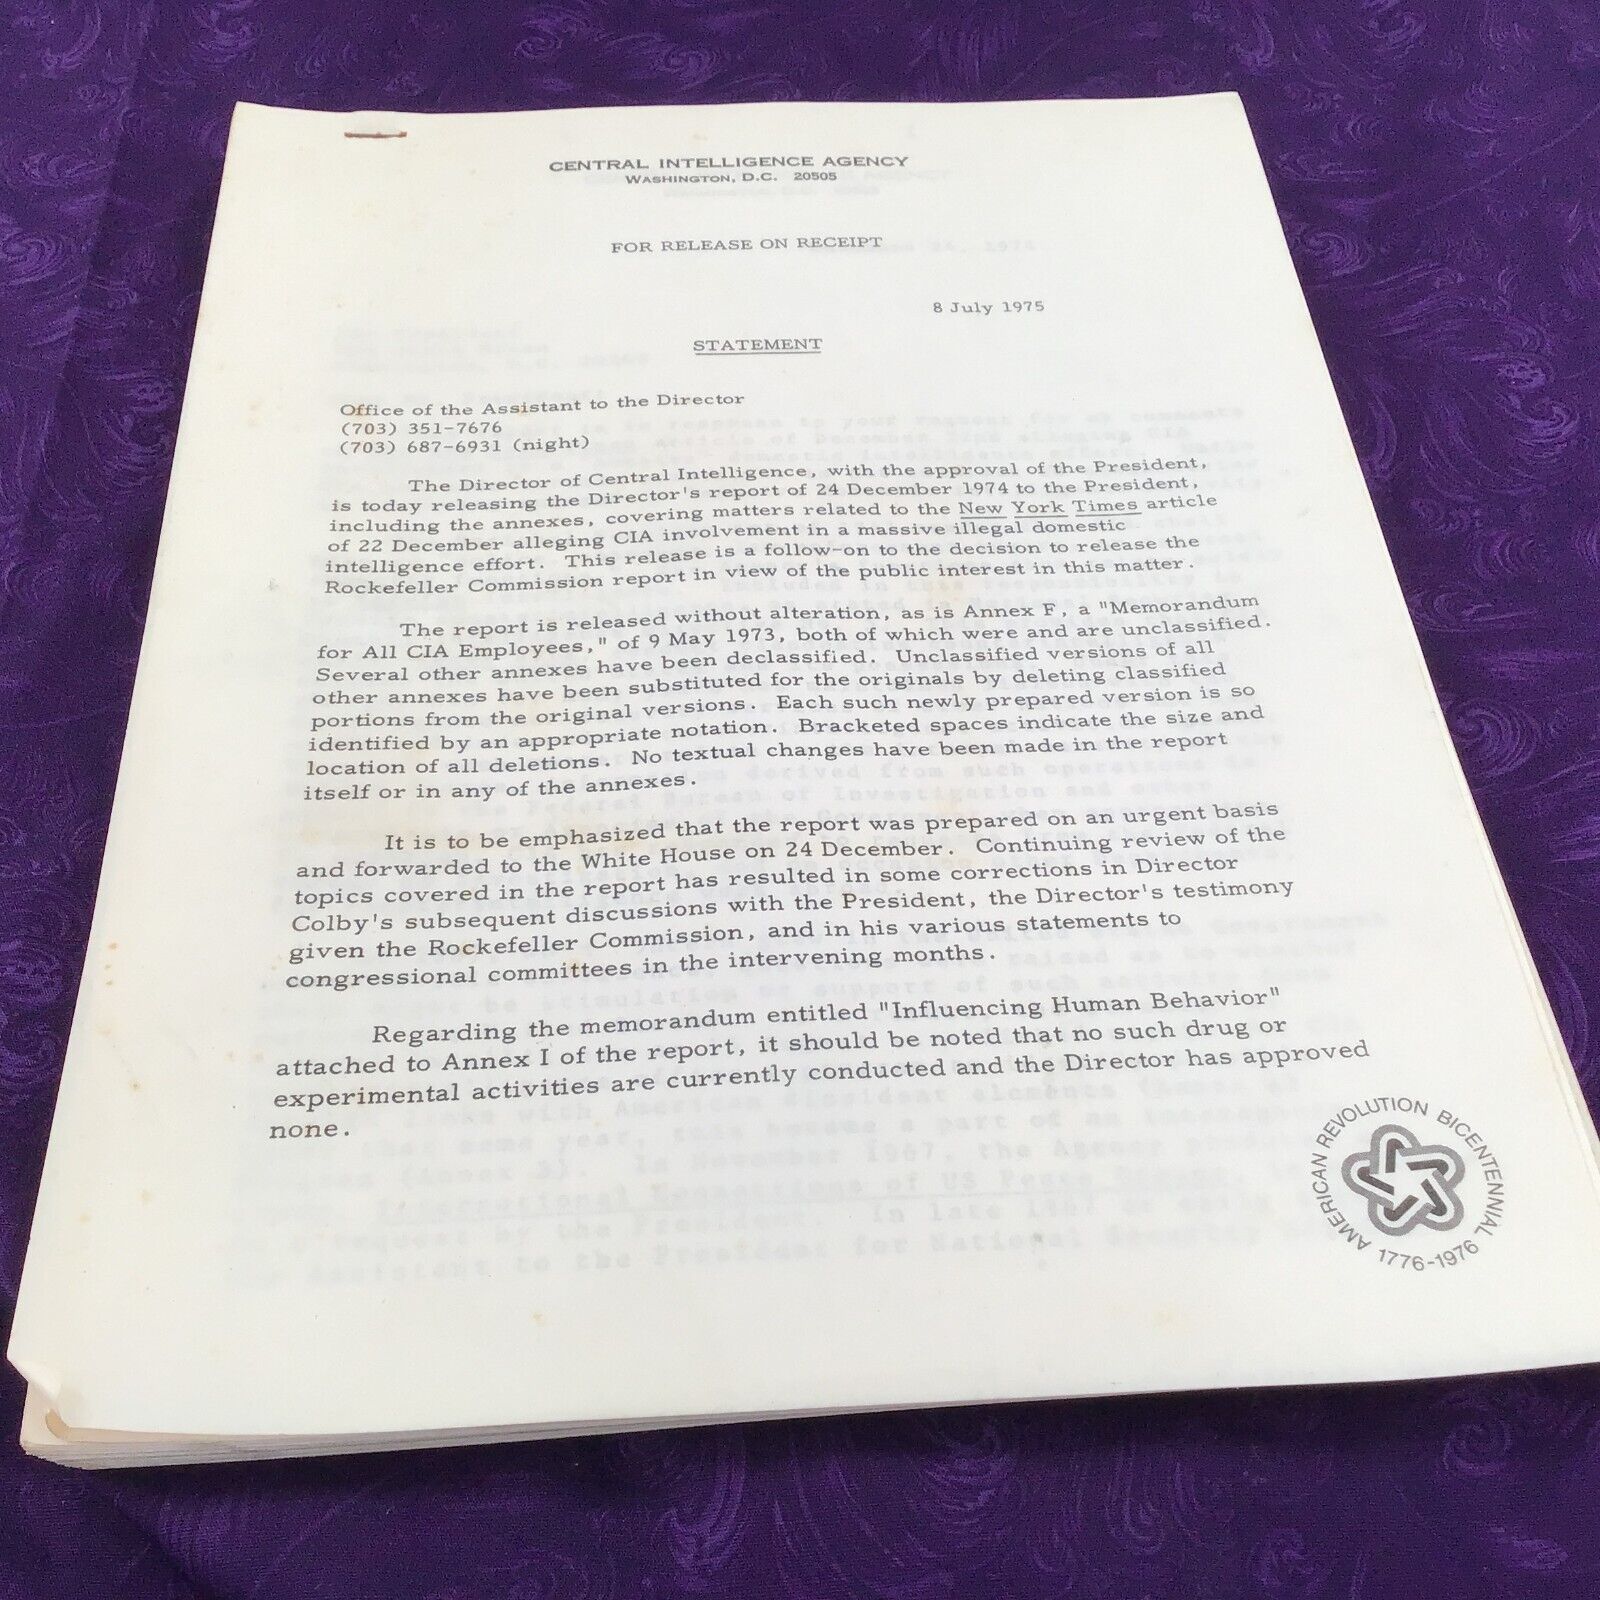 50+ Page Statement from CIA /President Ford July 8, 1975 concerning domestic spy